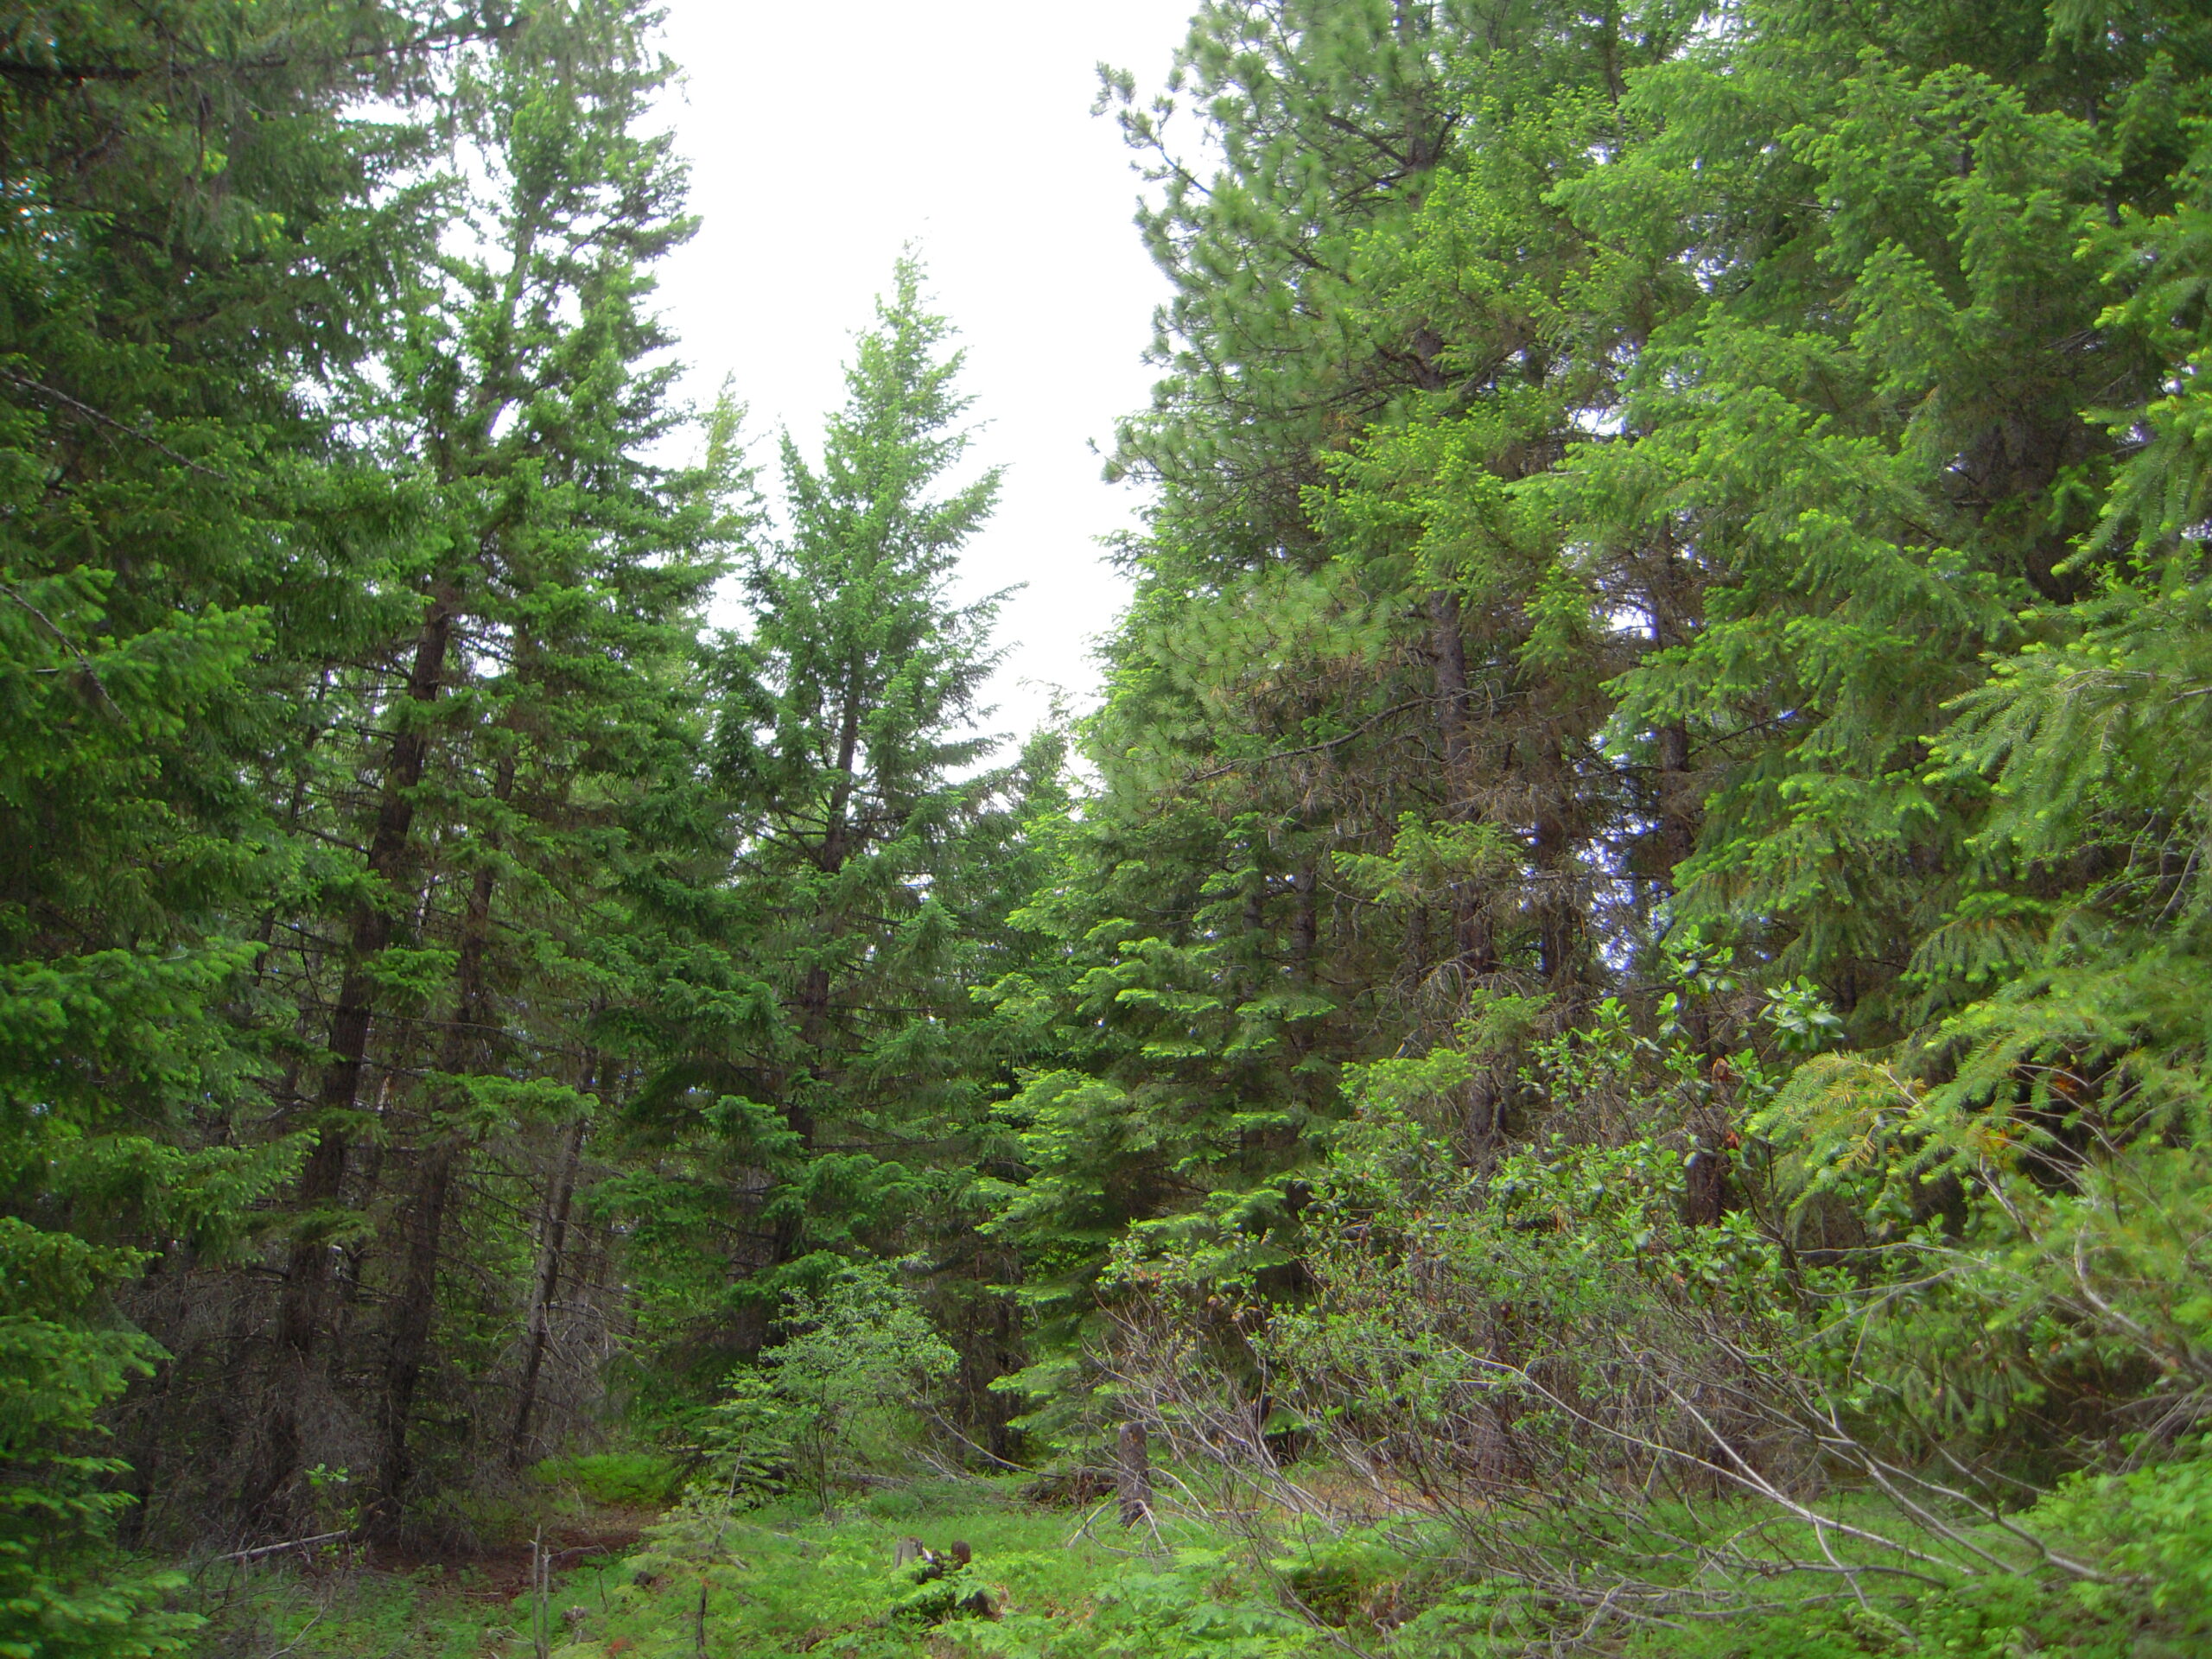 A small opening in the canopy with some understory saplings surrounded by overstory trees.